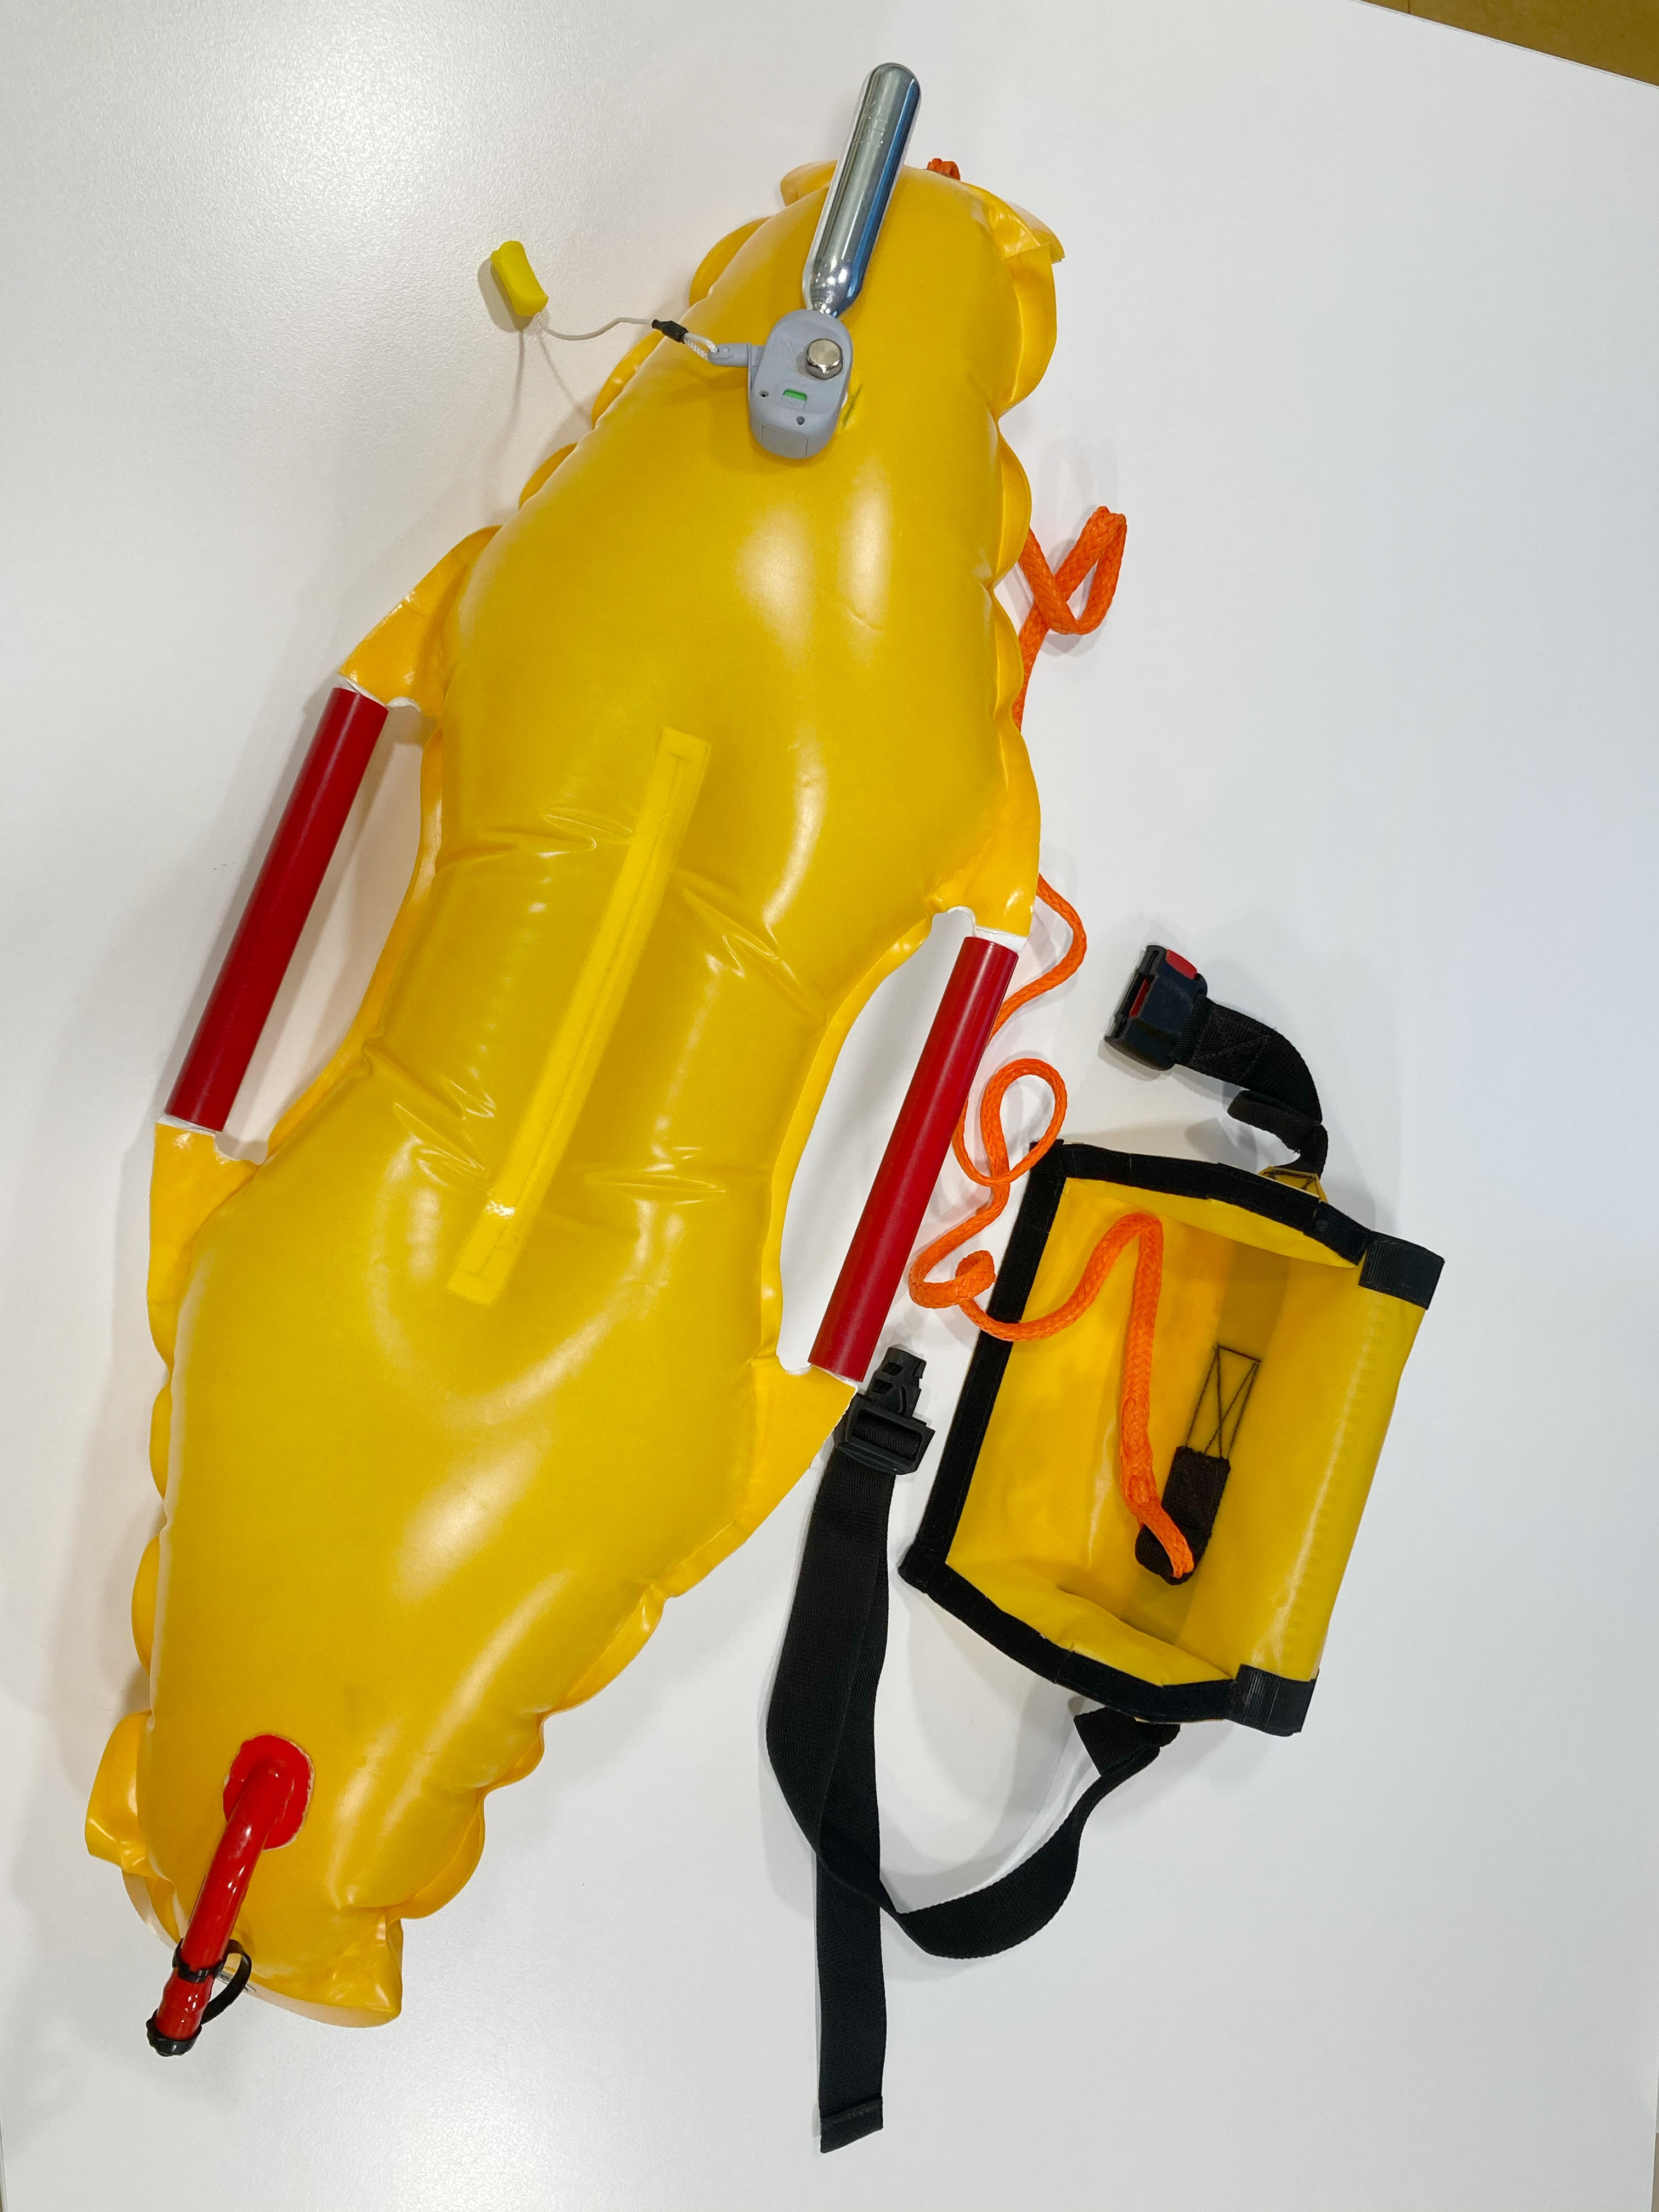 Quick RESCUE. New foldable, self-inflating, light and highly portable device for water rescue and lifesaving